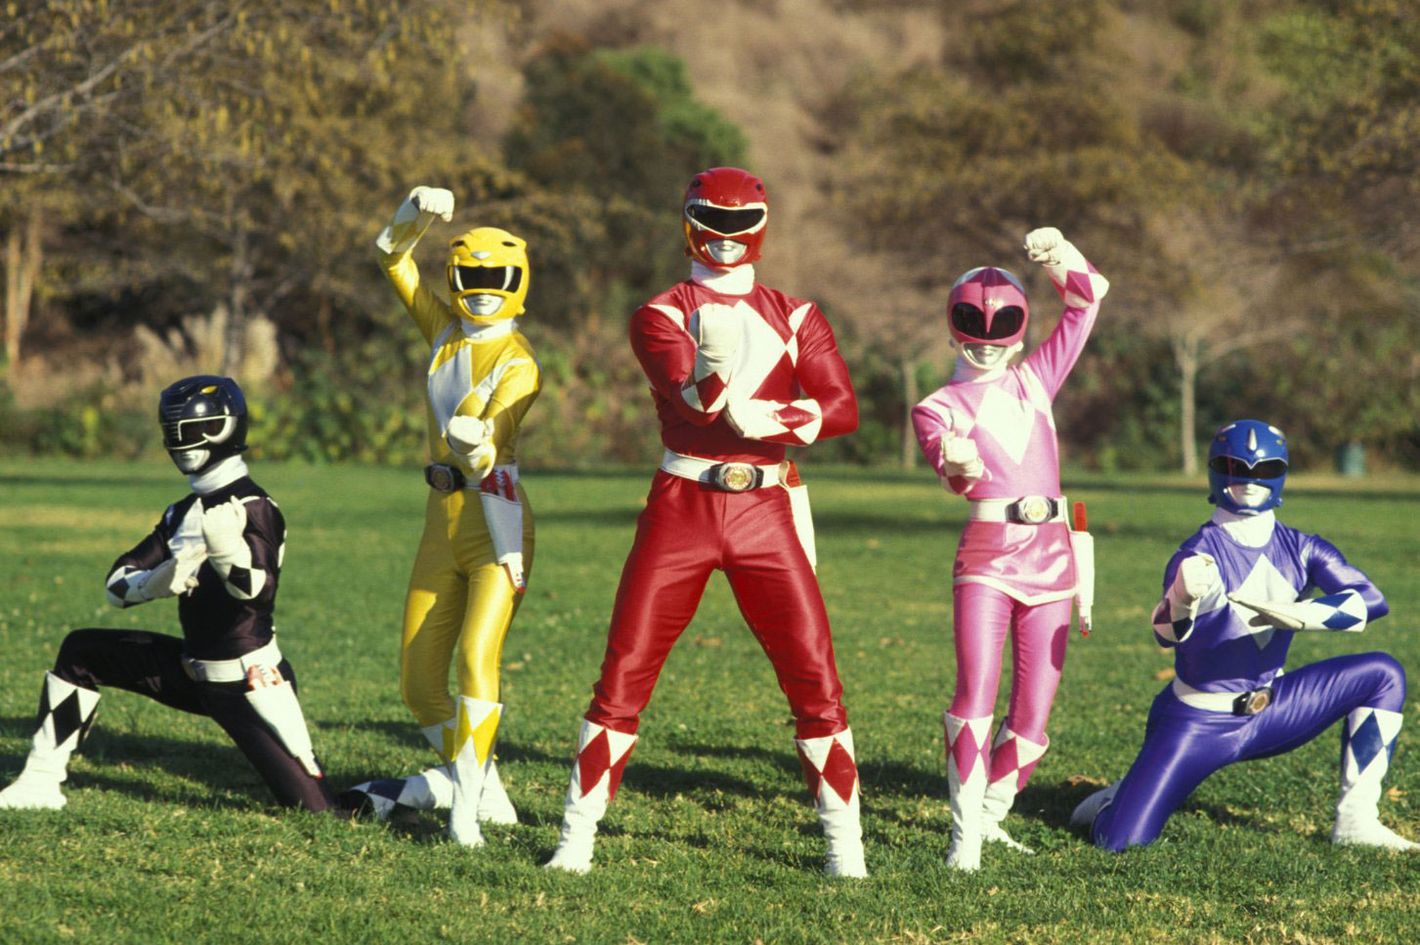 What Happened to the Original MIGHTY MORPHIN POWER RANGERS?